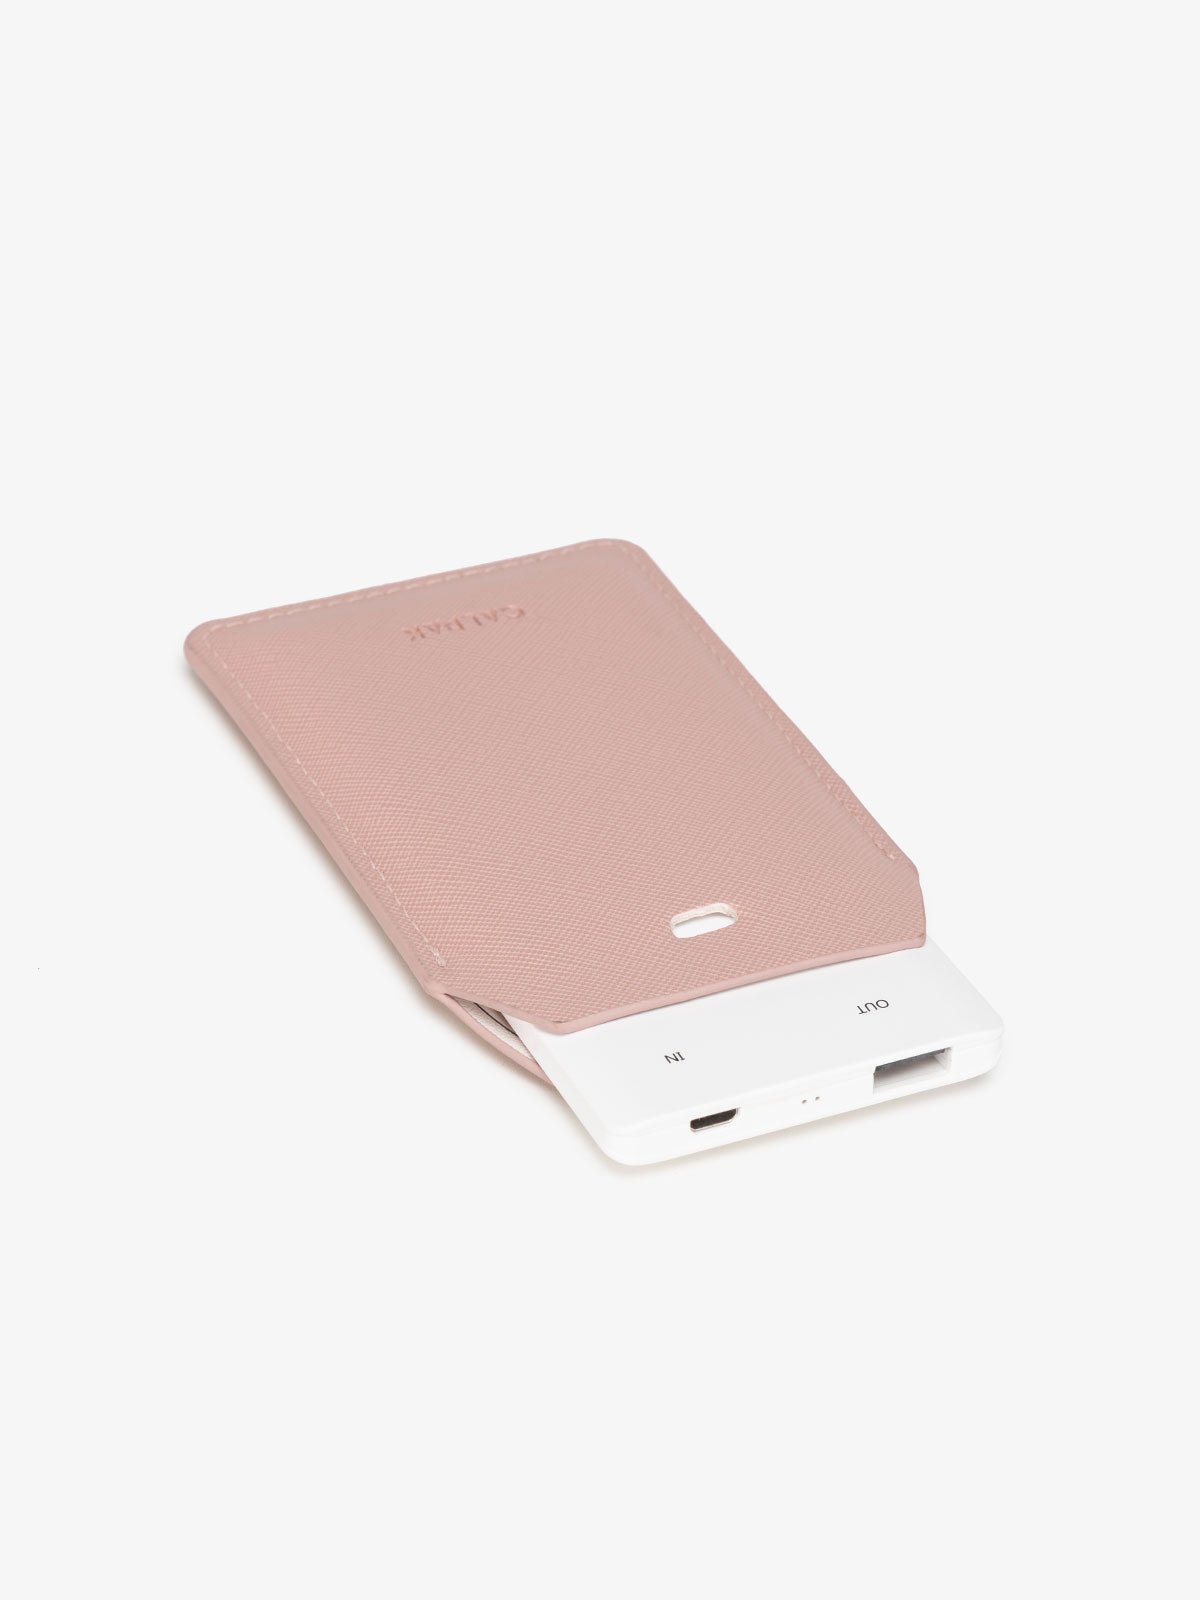 CALPAK pink blush portable charger for luggage